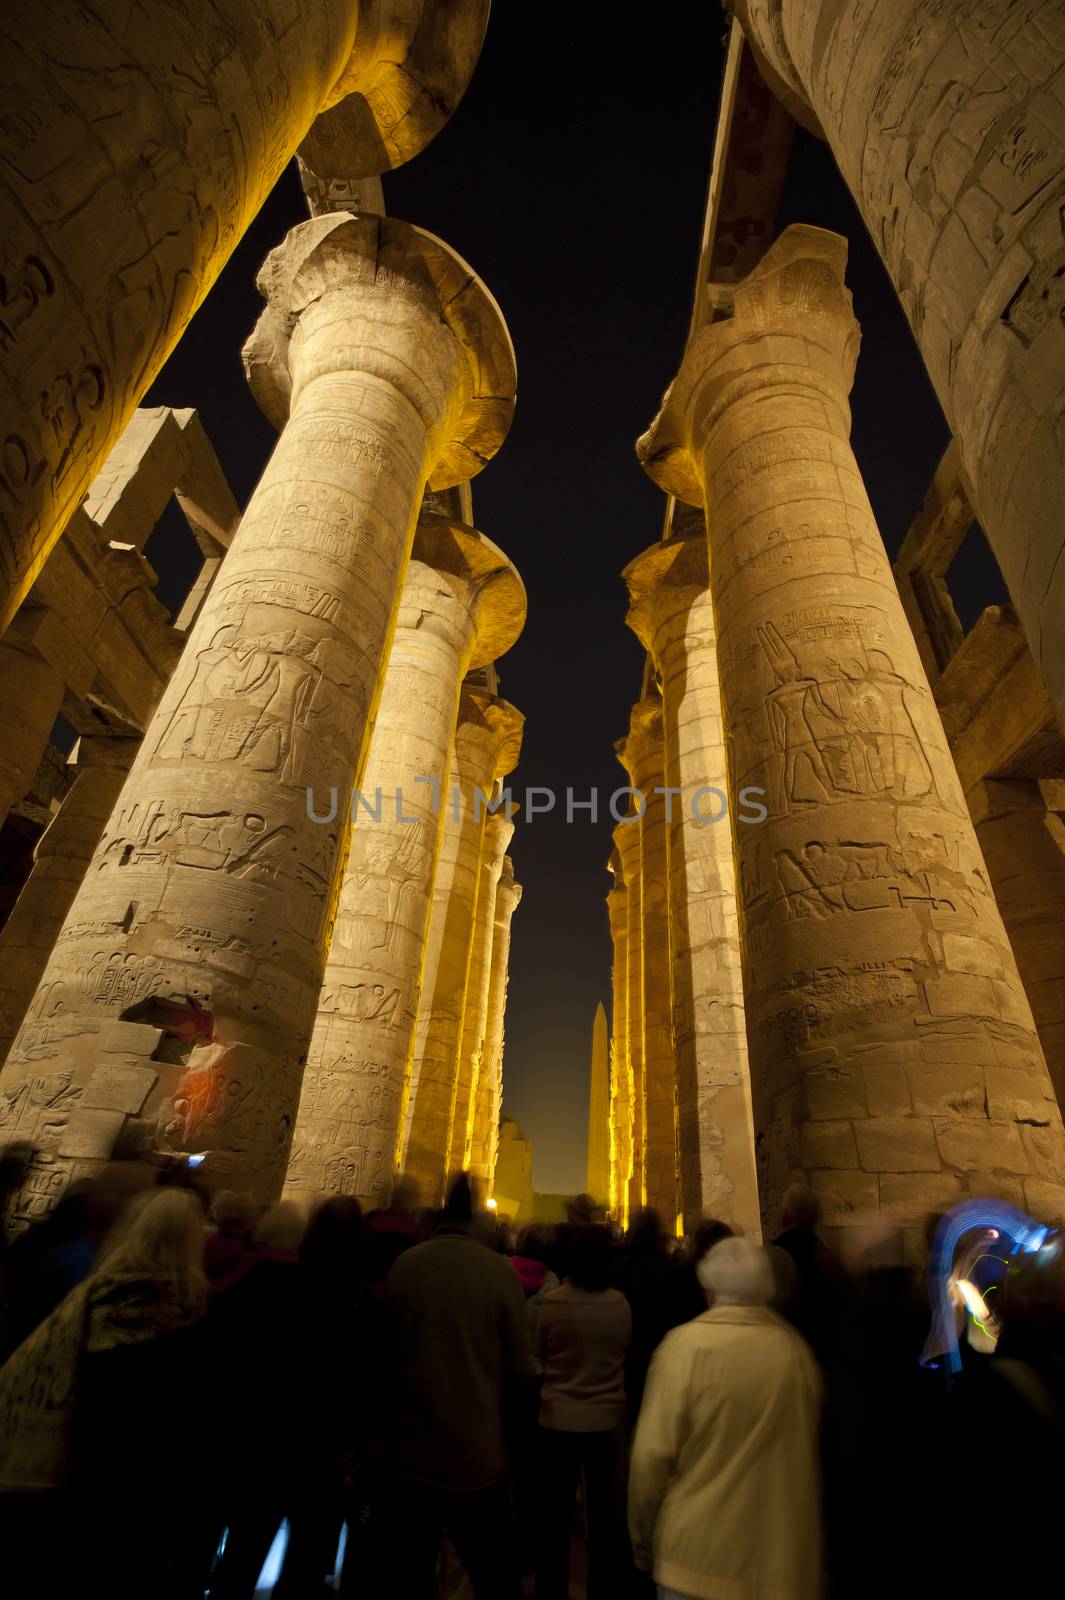 Columns in the ancient egyptian temple of Karnak at Luxor with hieroglyphic carvings lit up during the night sound and light show